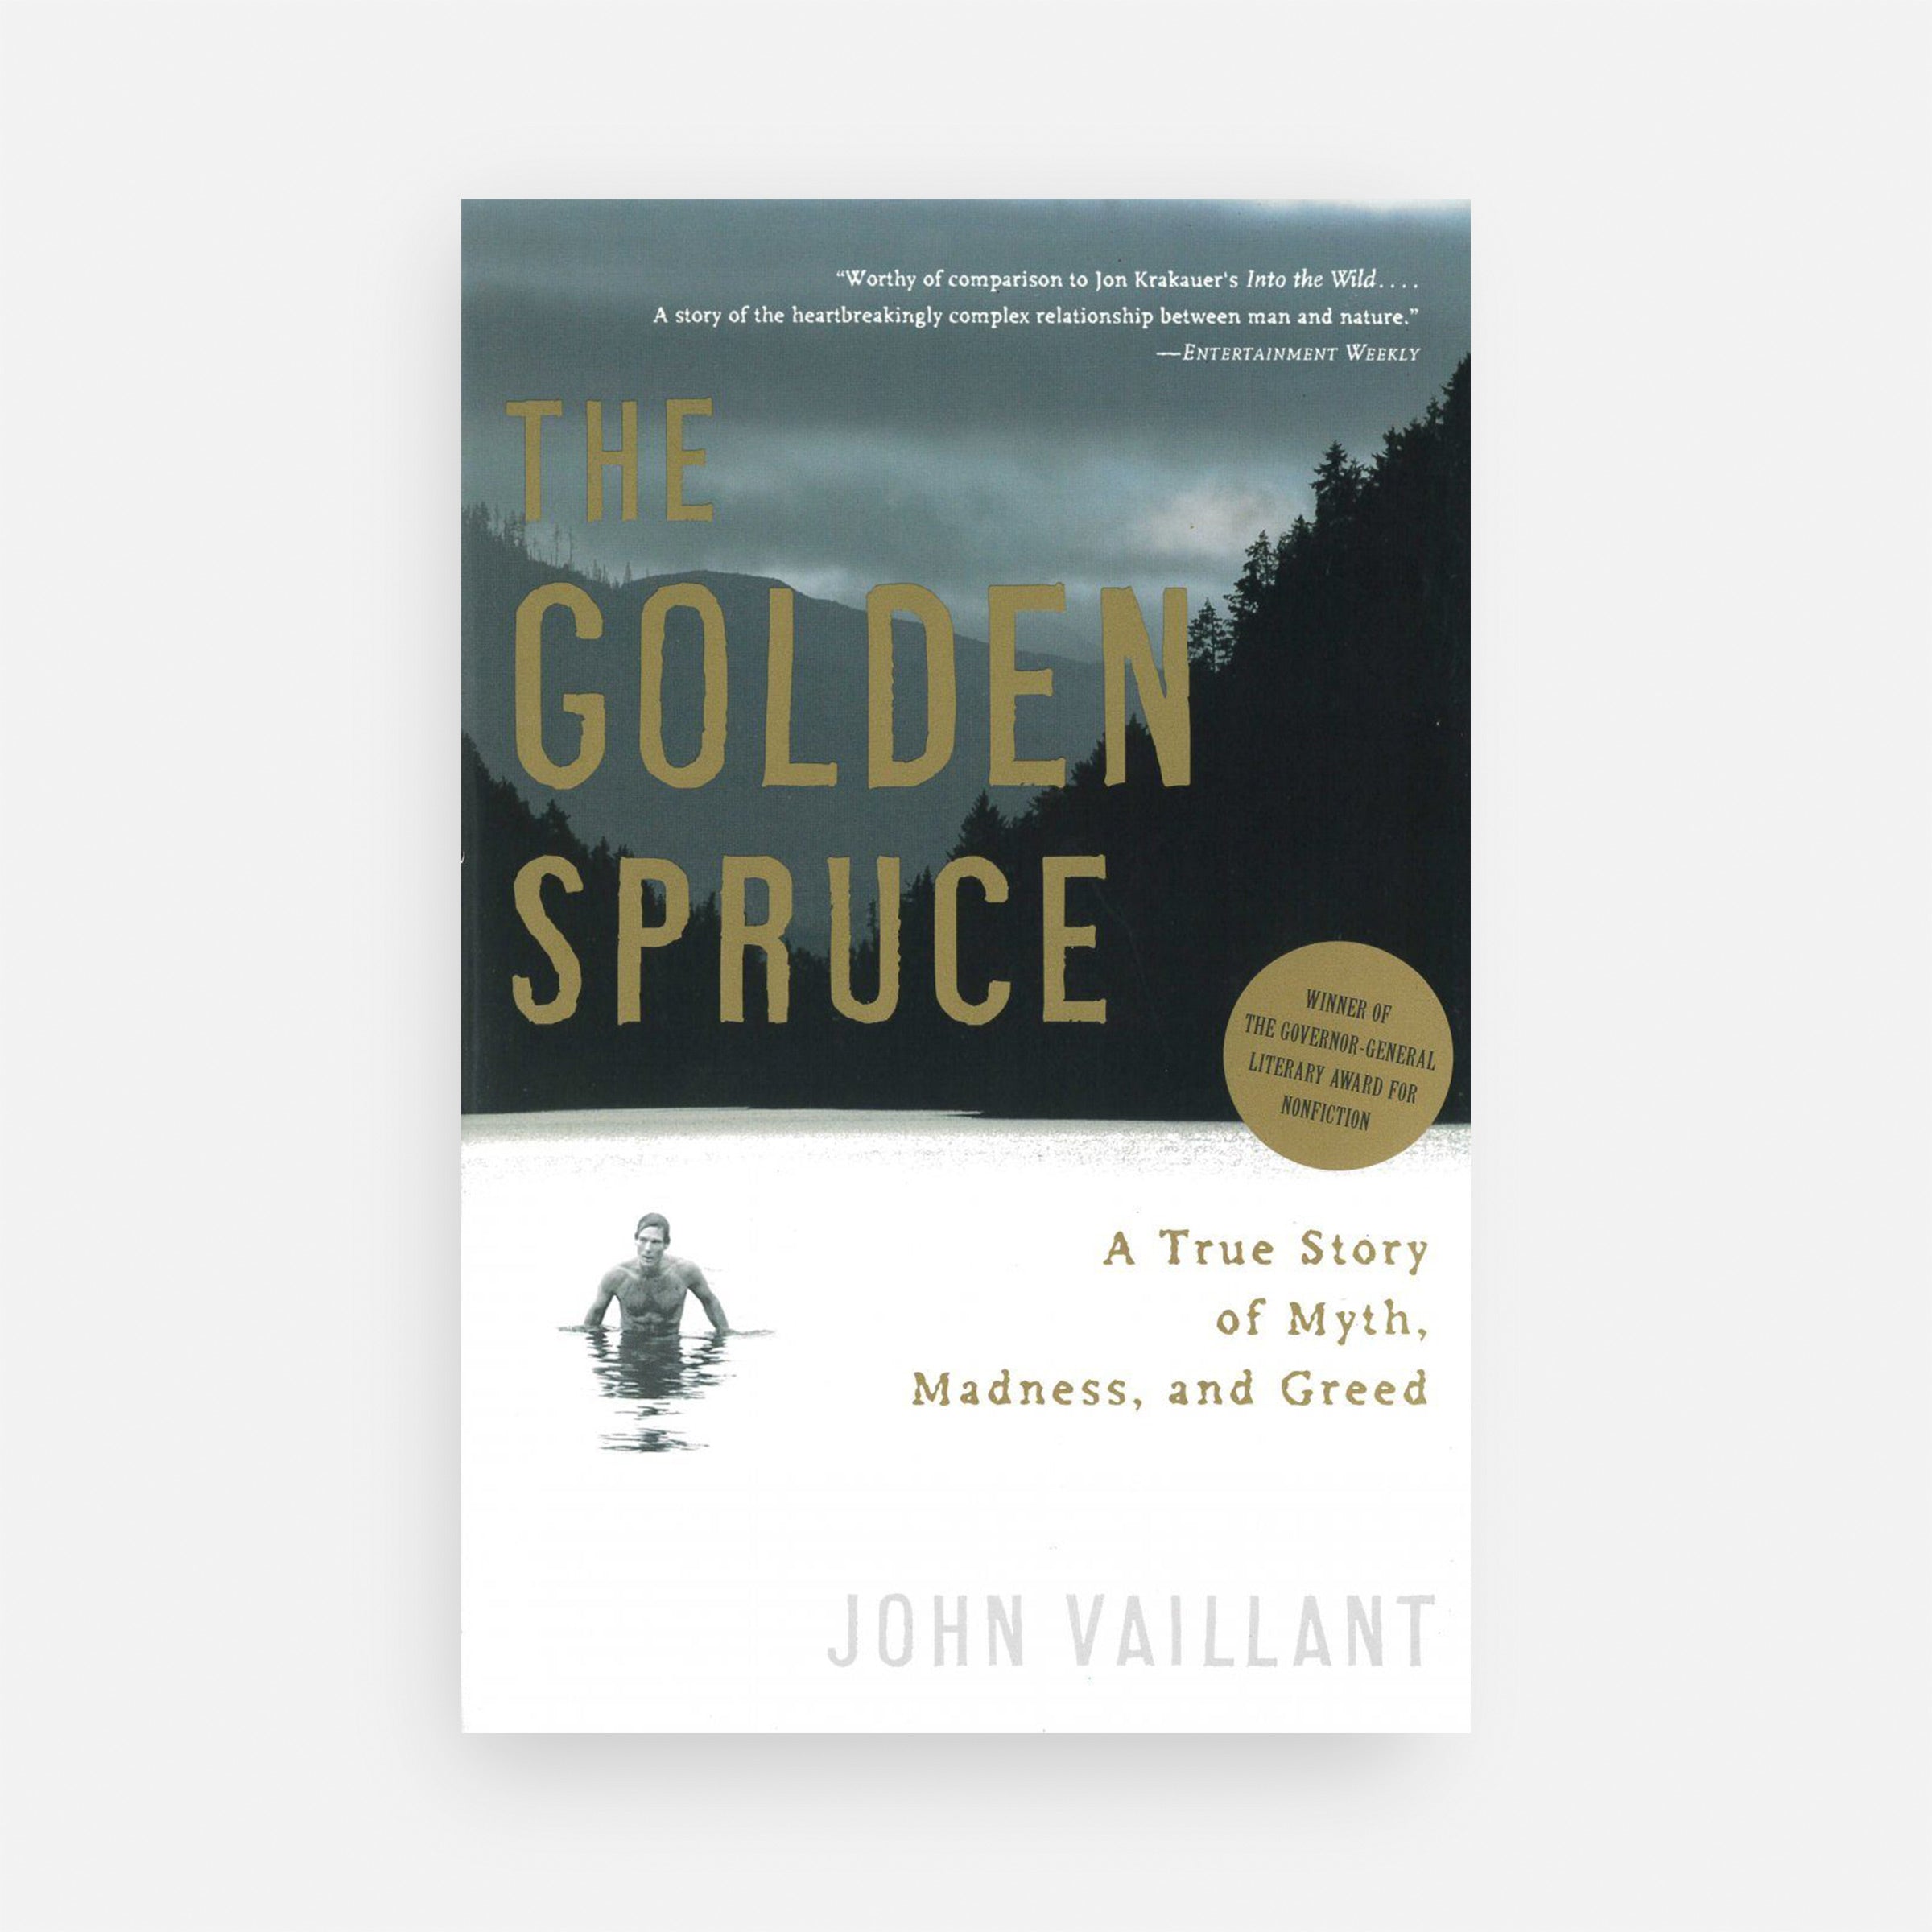 The Golden Spruce by John Vaillant book cover